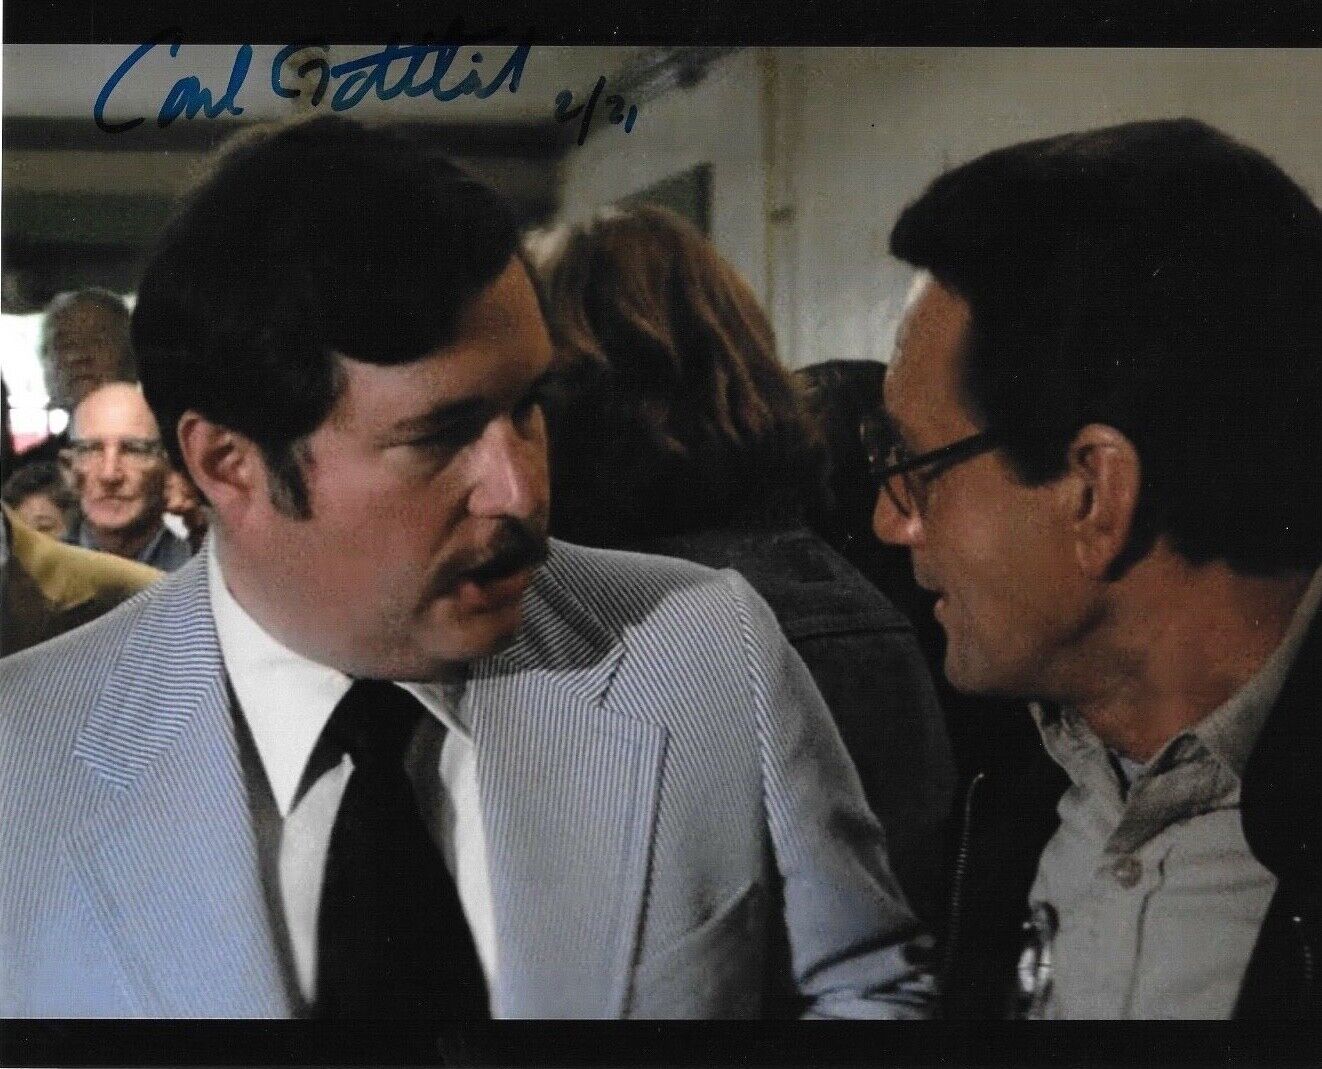 * CARL GOTTLIEB * signed 8x10 Photo Poster painting * JAWS * PROOF * COA * 3